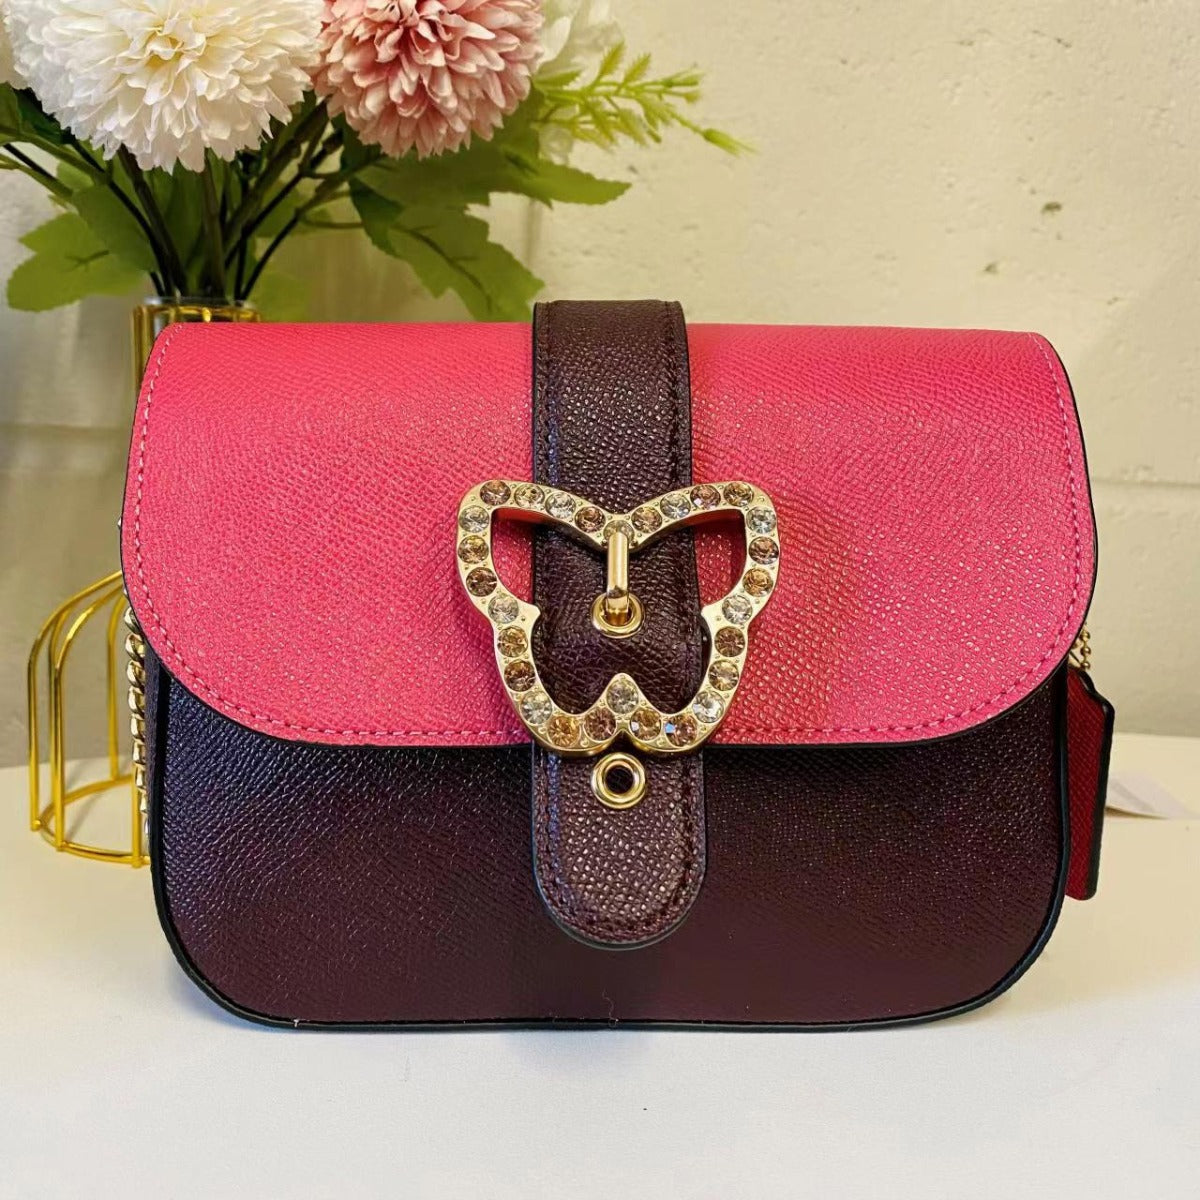 Coach C6796 Gemma Crossbody In Colorblock With Butterfly Buckle In Strwbrry Hze/Crnbrry